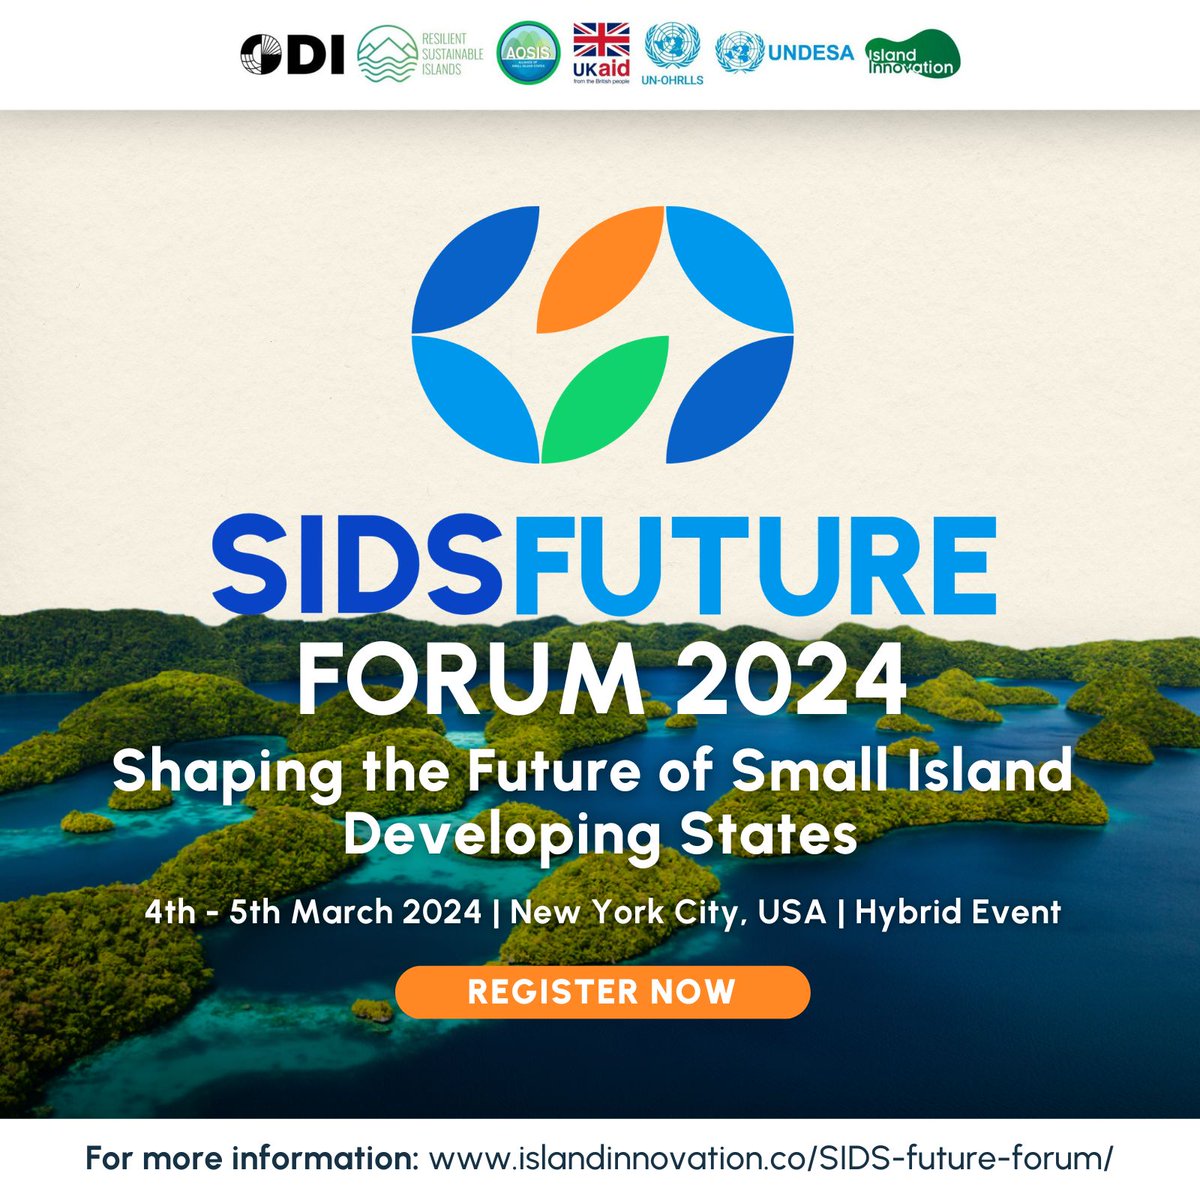 Did you miss the #SIDSFutureForum? There are a few hours left to register online and gain free access to the presentations and Q&A session recordings from both days! buff.ly/3T0m1ze